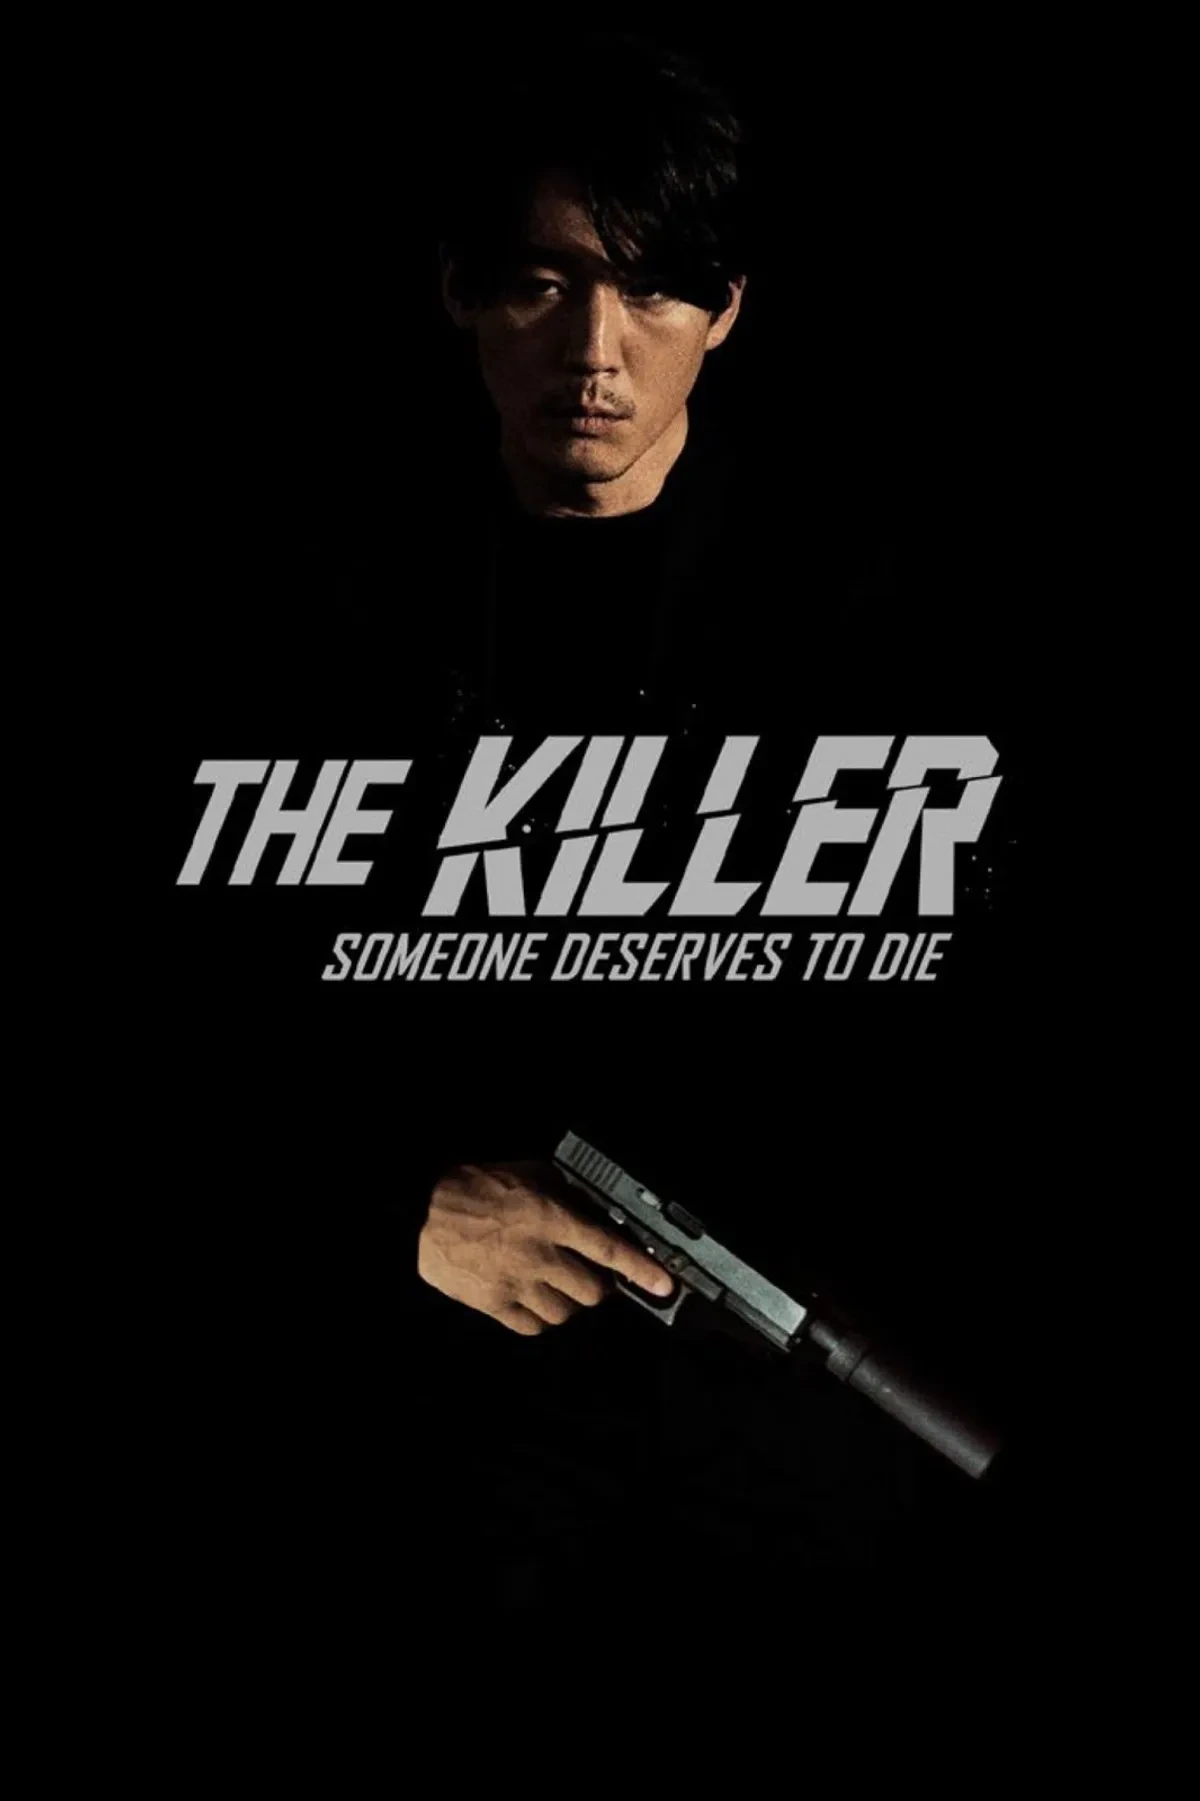 Download The Killer: A Girl Who Deserves to Die (2022) Dual Audio [Hindi + English] BluRay 480p [380MB] | 720p [920MB] | 1080p [2.1GB]